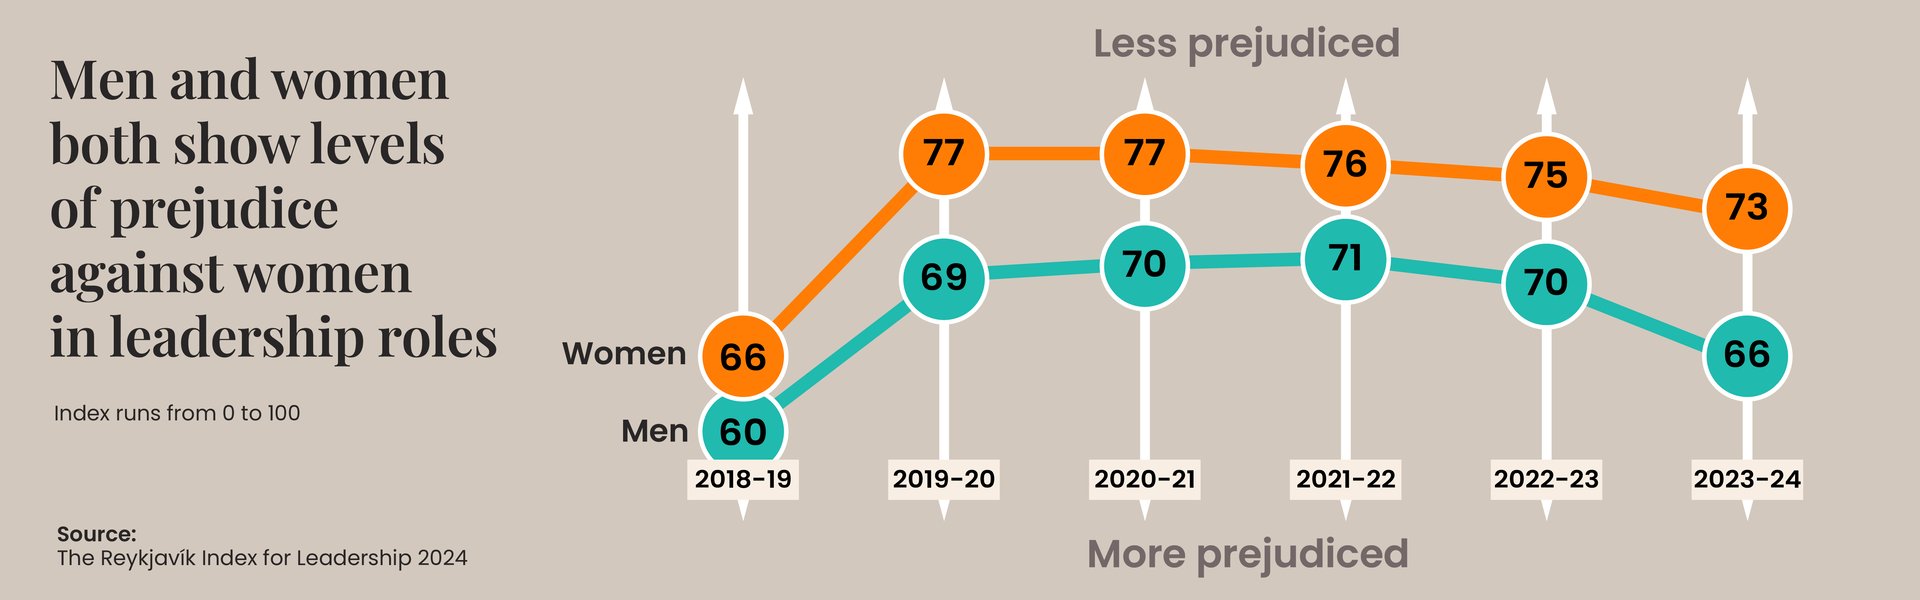 Women are prejudiced against other women - but men are more so. A graph displaying a widening gender gap but also a regression in attitudes of women - 75 and 70 index scored from women and men respectively in 2022-2023, compared to 73 and 66 in 2023-2024